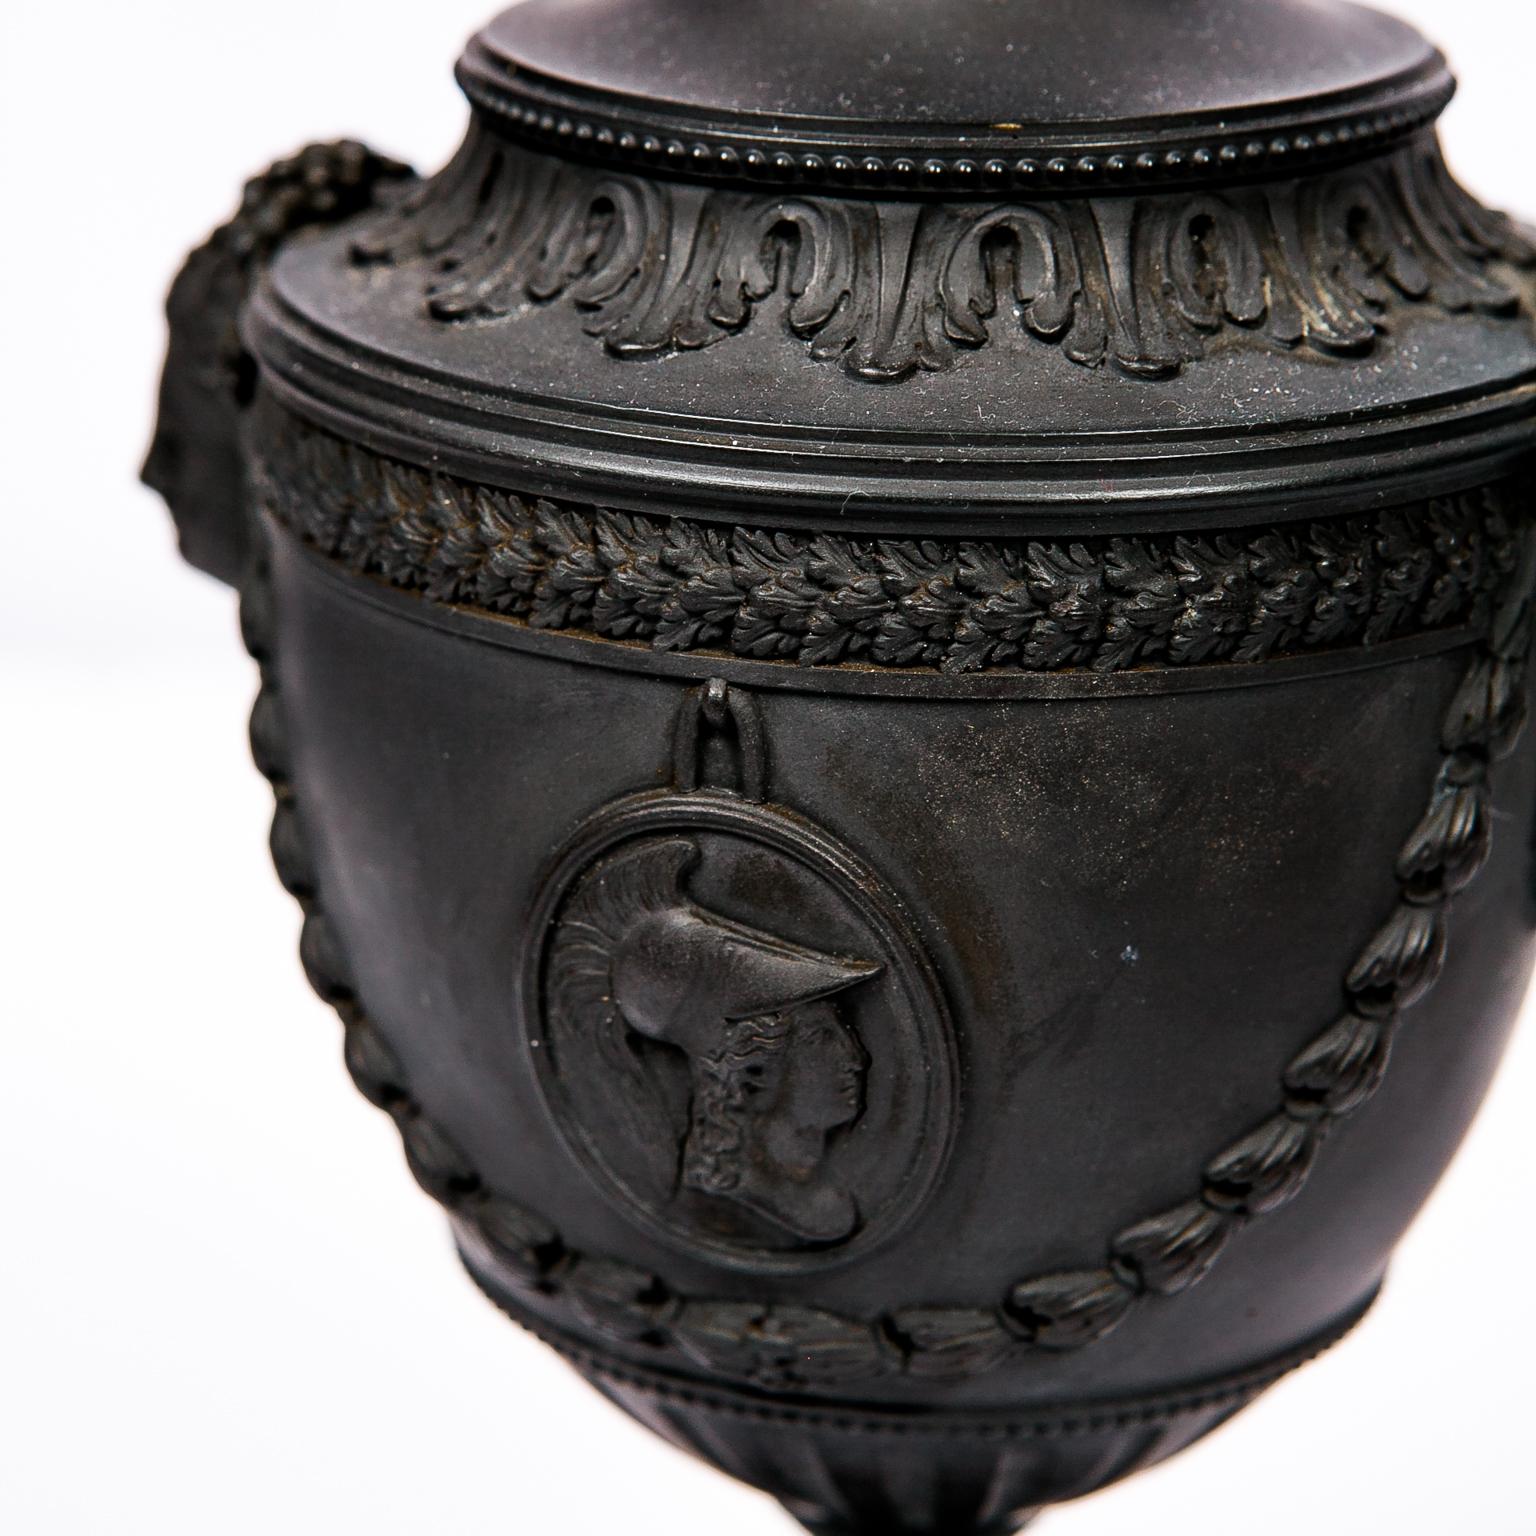 A pair of Black Basalt covered urns made by H. Palmer of Hanley Staffordshire.
This pair of vases is a gem of the neoclassical style. They combine beautiful molded Athena Cameos, exceptional Cleopatra mask handles supported by swags of husk, with